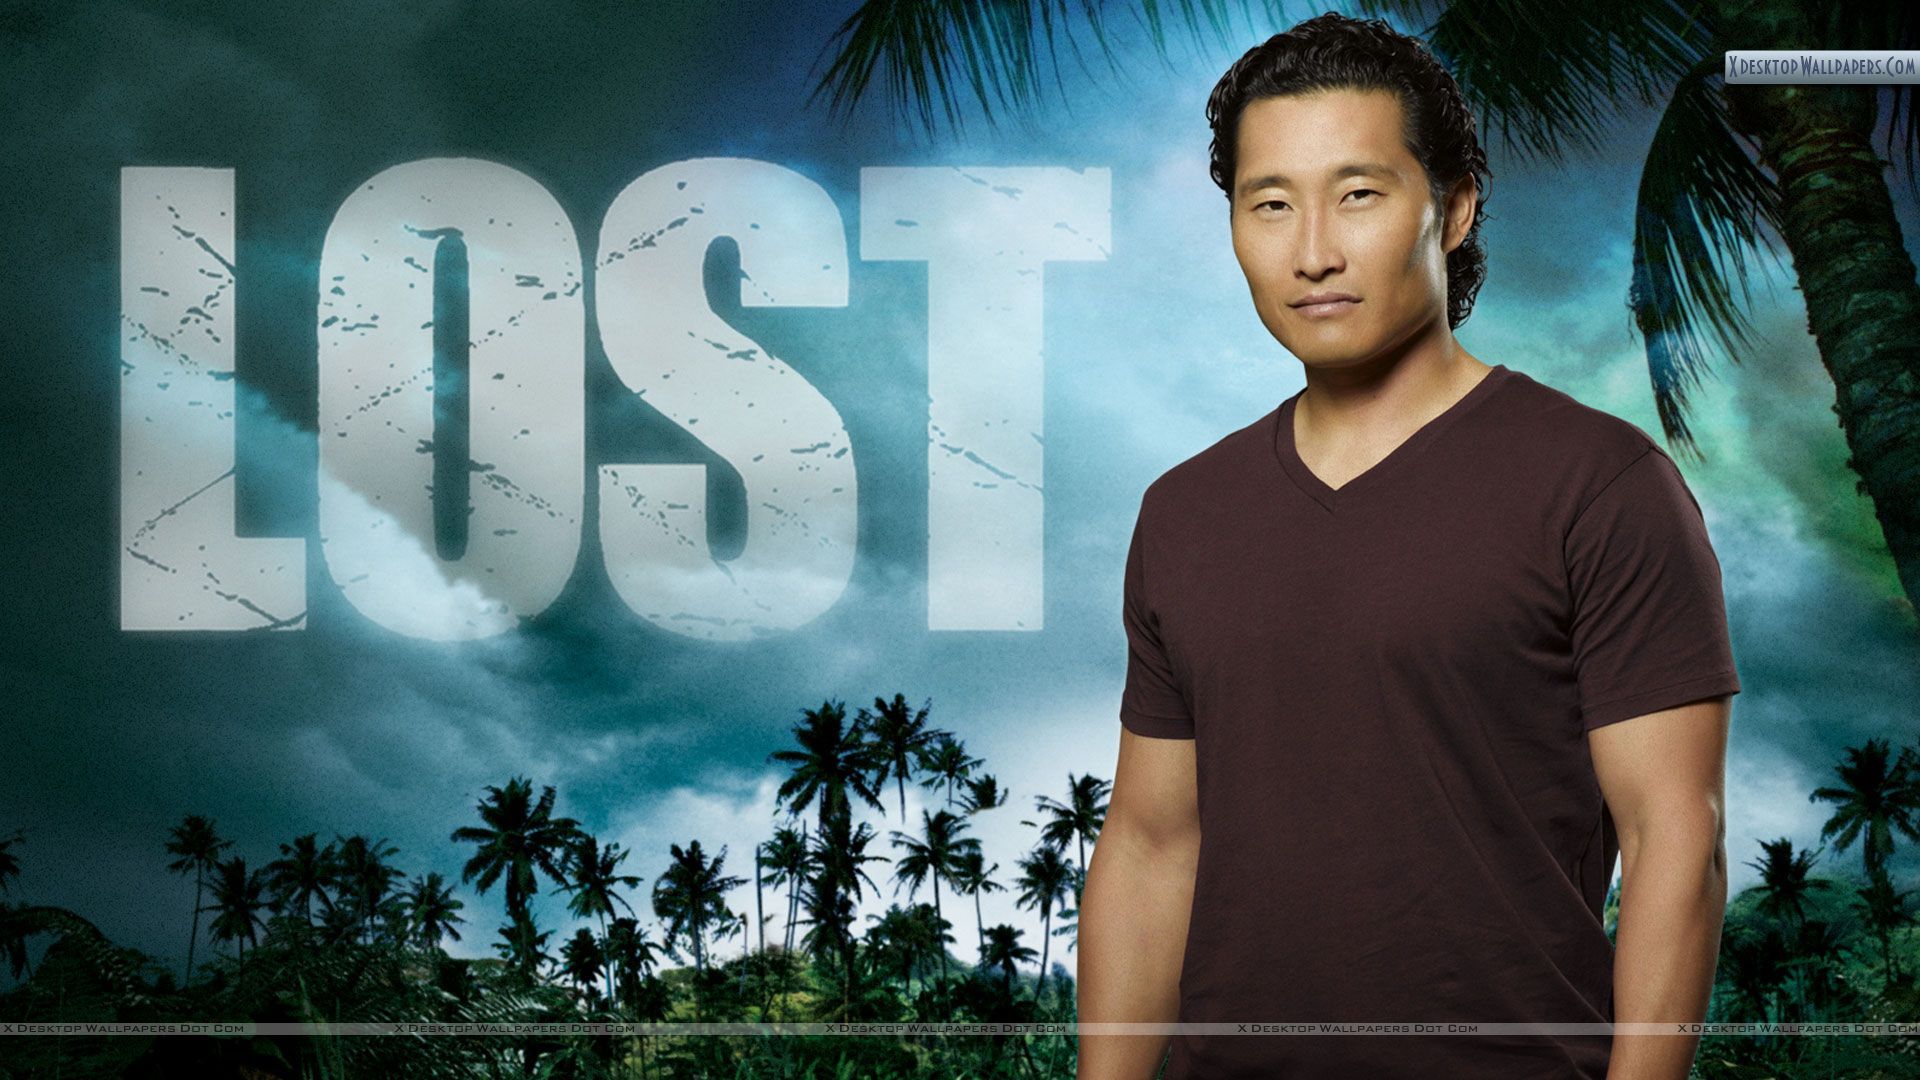 Lost TV Series Wallpaper, Photo & Image in HD